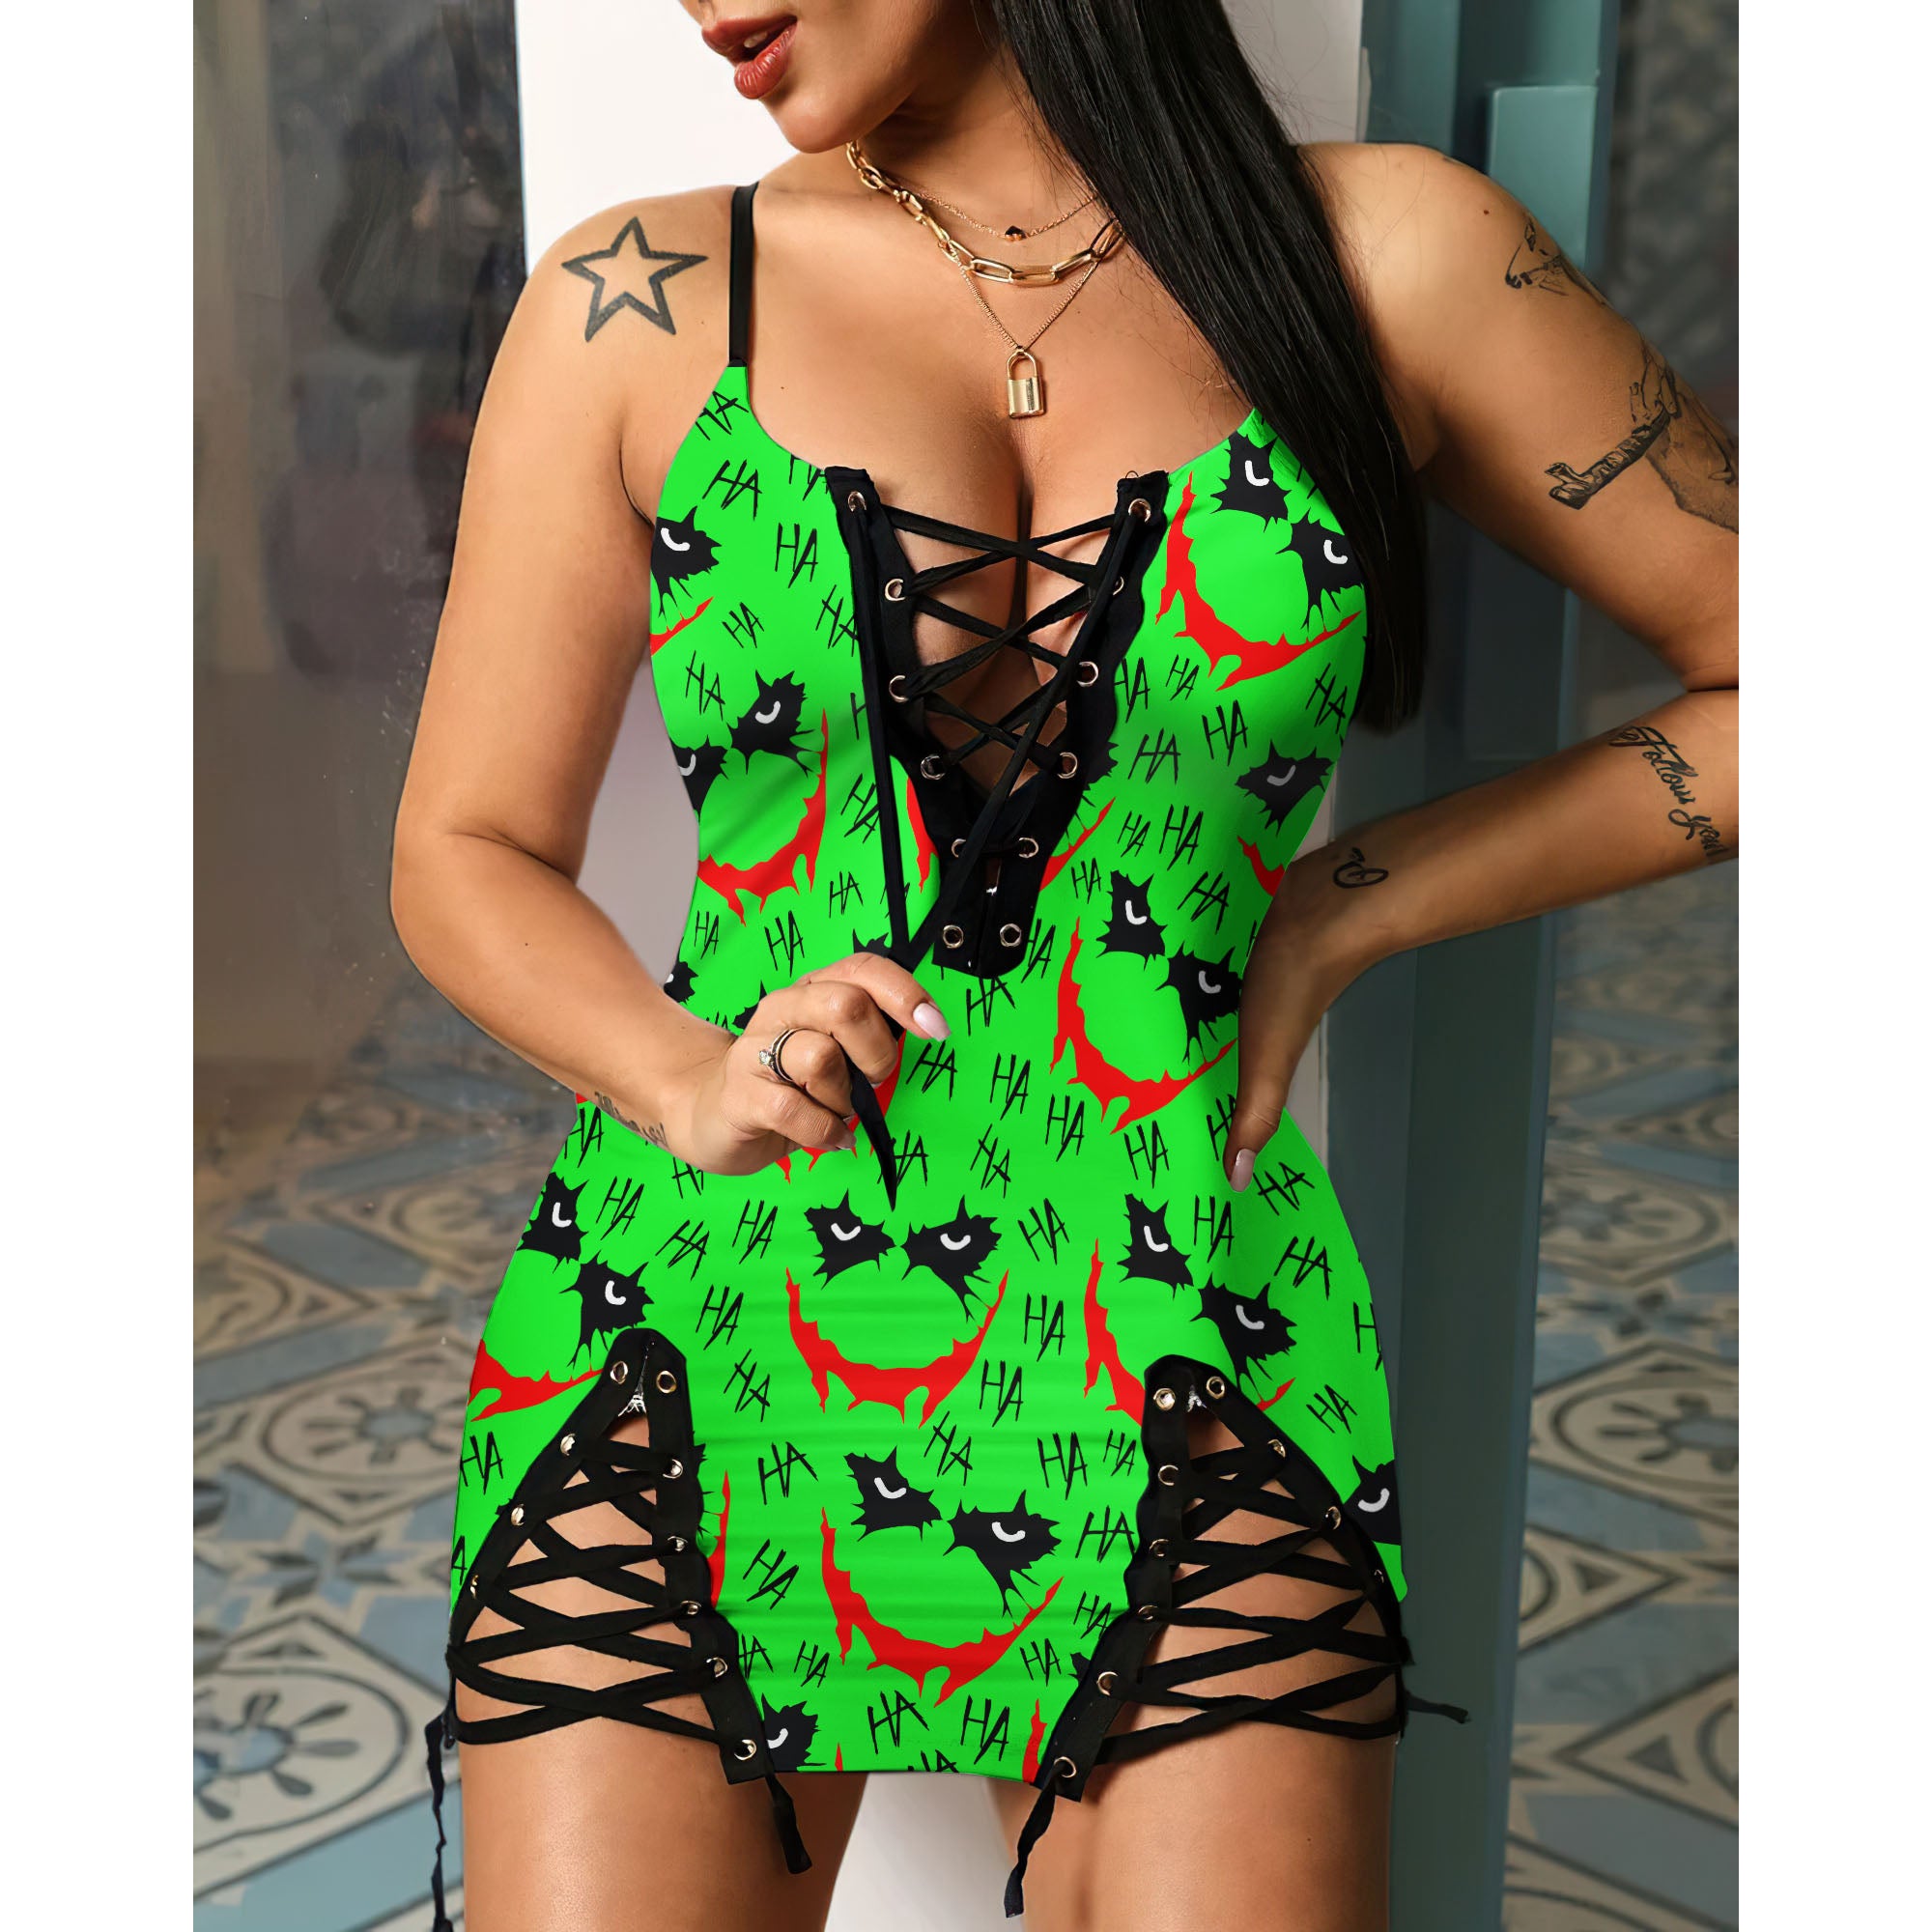 Express your personal style with the Hot Gothic Dress, a timeless piece featuring a unique Scary Green Face, perfect for enhancing your daily fashion routine.